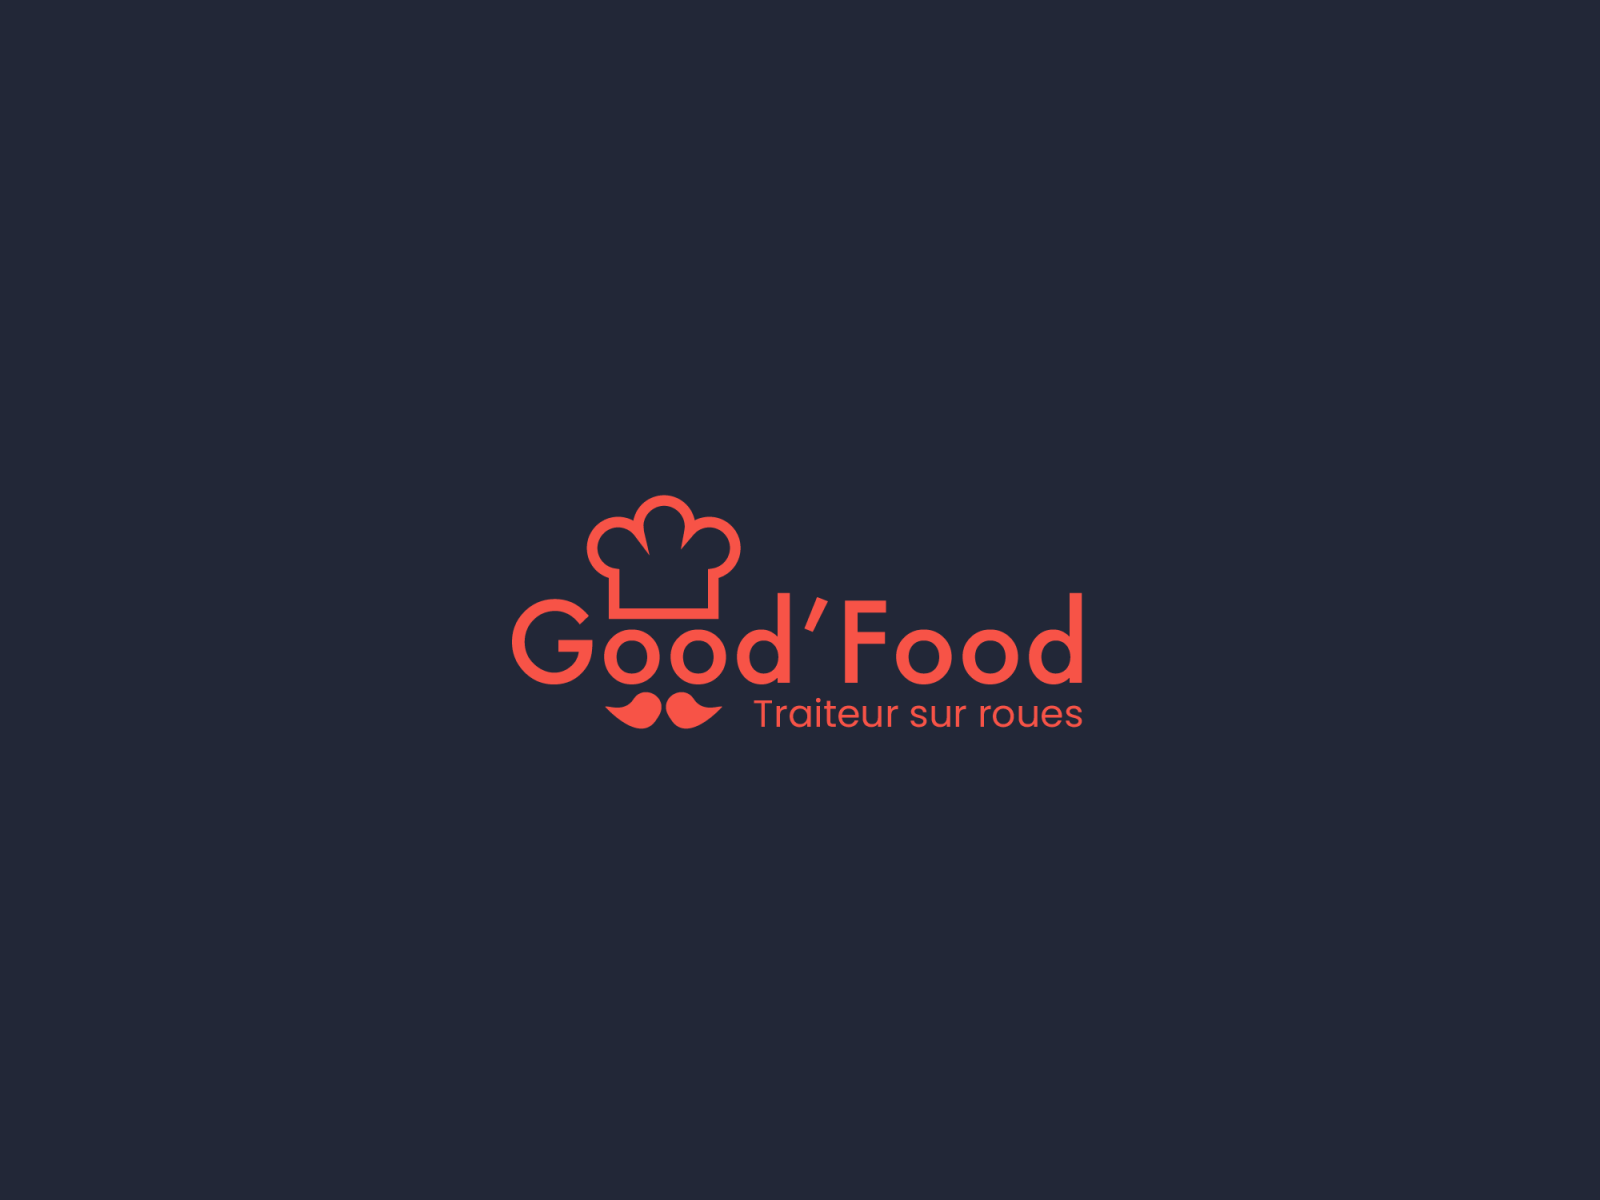 Good'Food - Logo Challenge by Camille Boniface on Dribbble